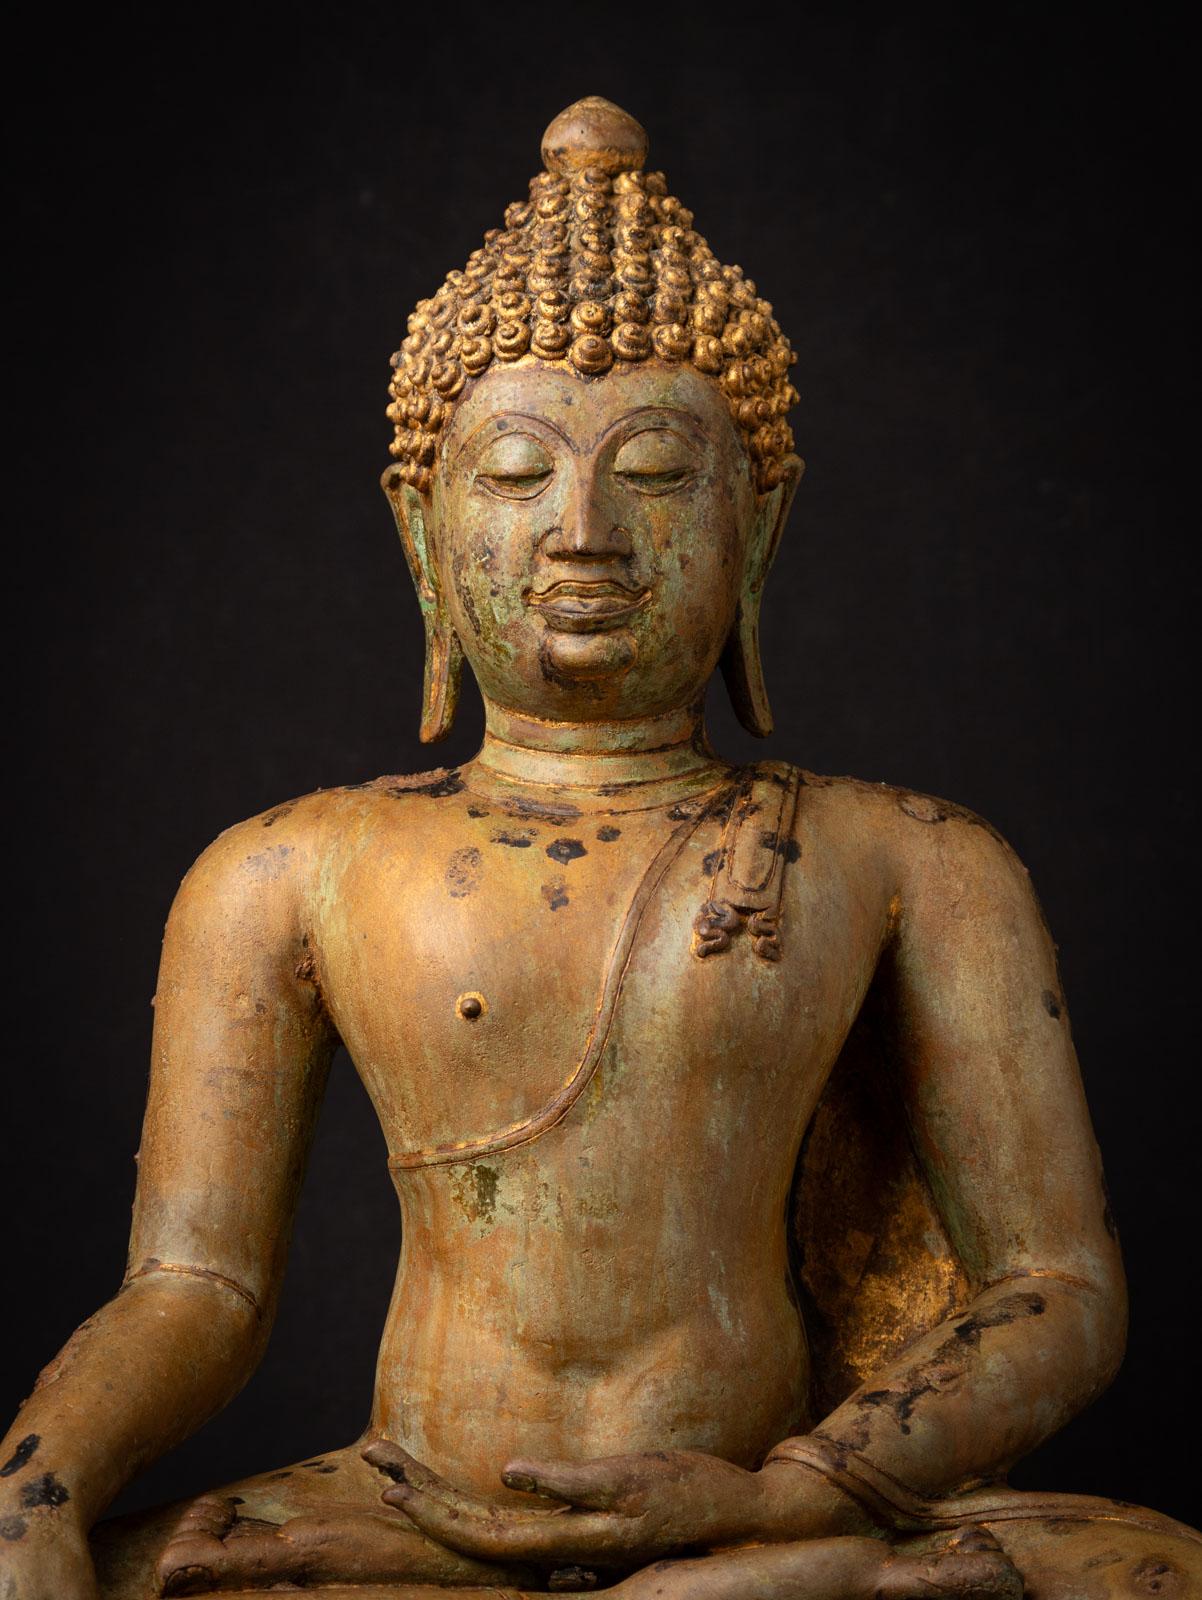 Antique bronze Thai Chiang Saen Buddha
Material : bronze
64,5 cm high
53,5 cm wide and 36 cm deep
With traces of 24 krt. gilding
Bhumisparsha mudra
Early 19th century
Weight: 27,8 kgs
Originating from Thailand
Nr: 2970-19